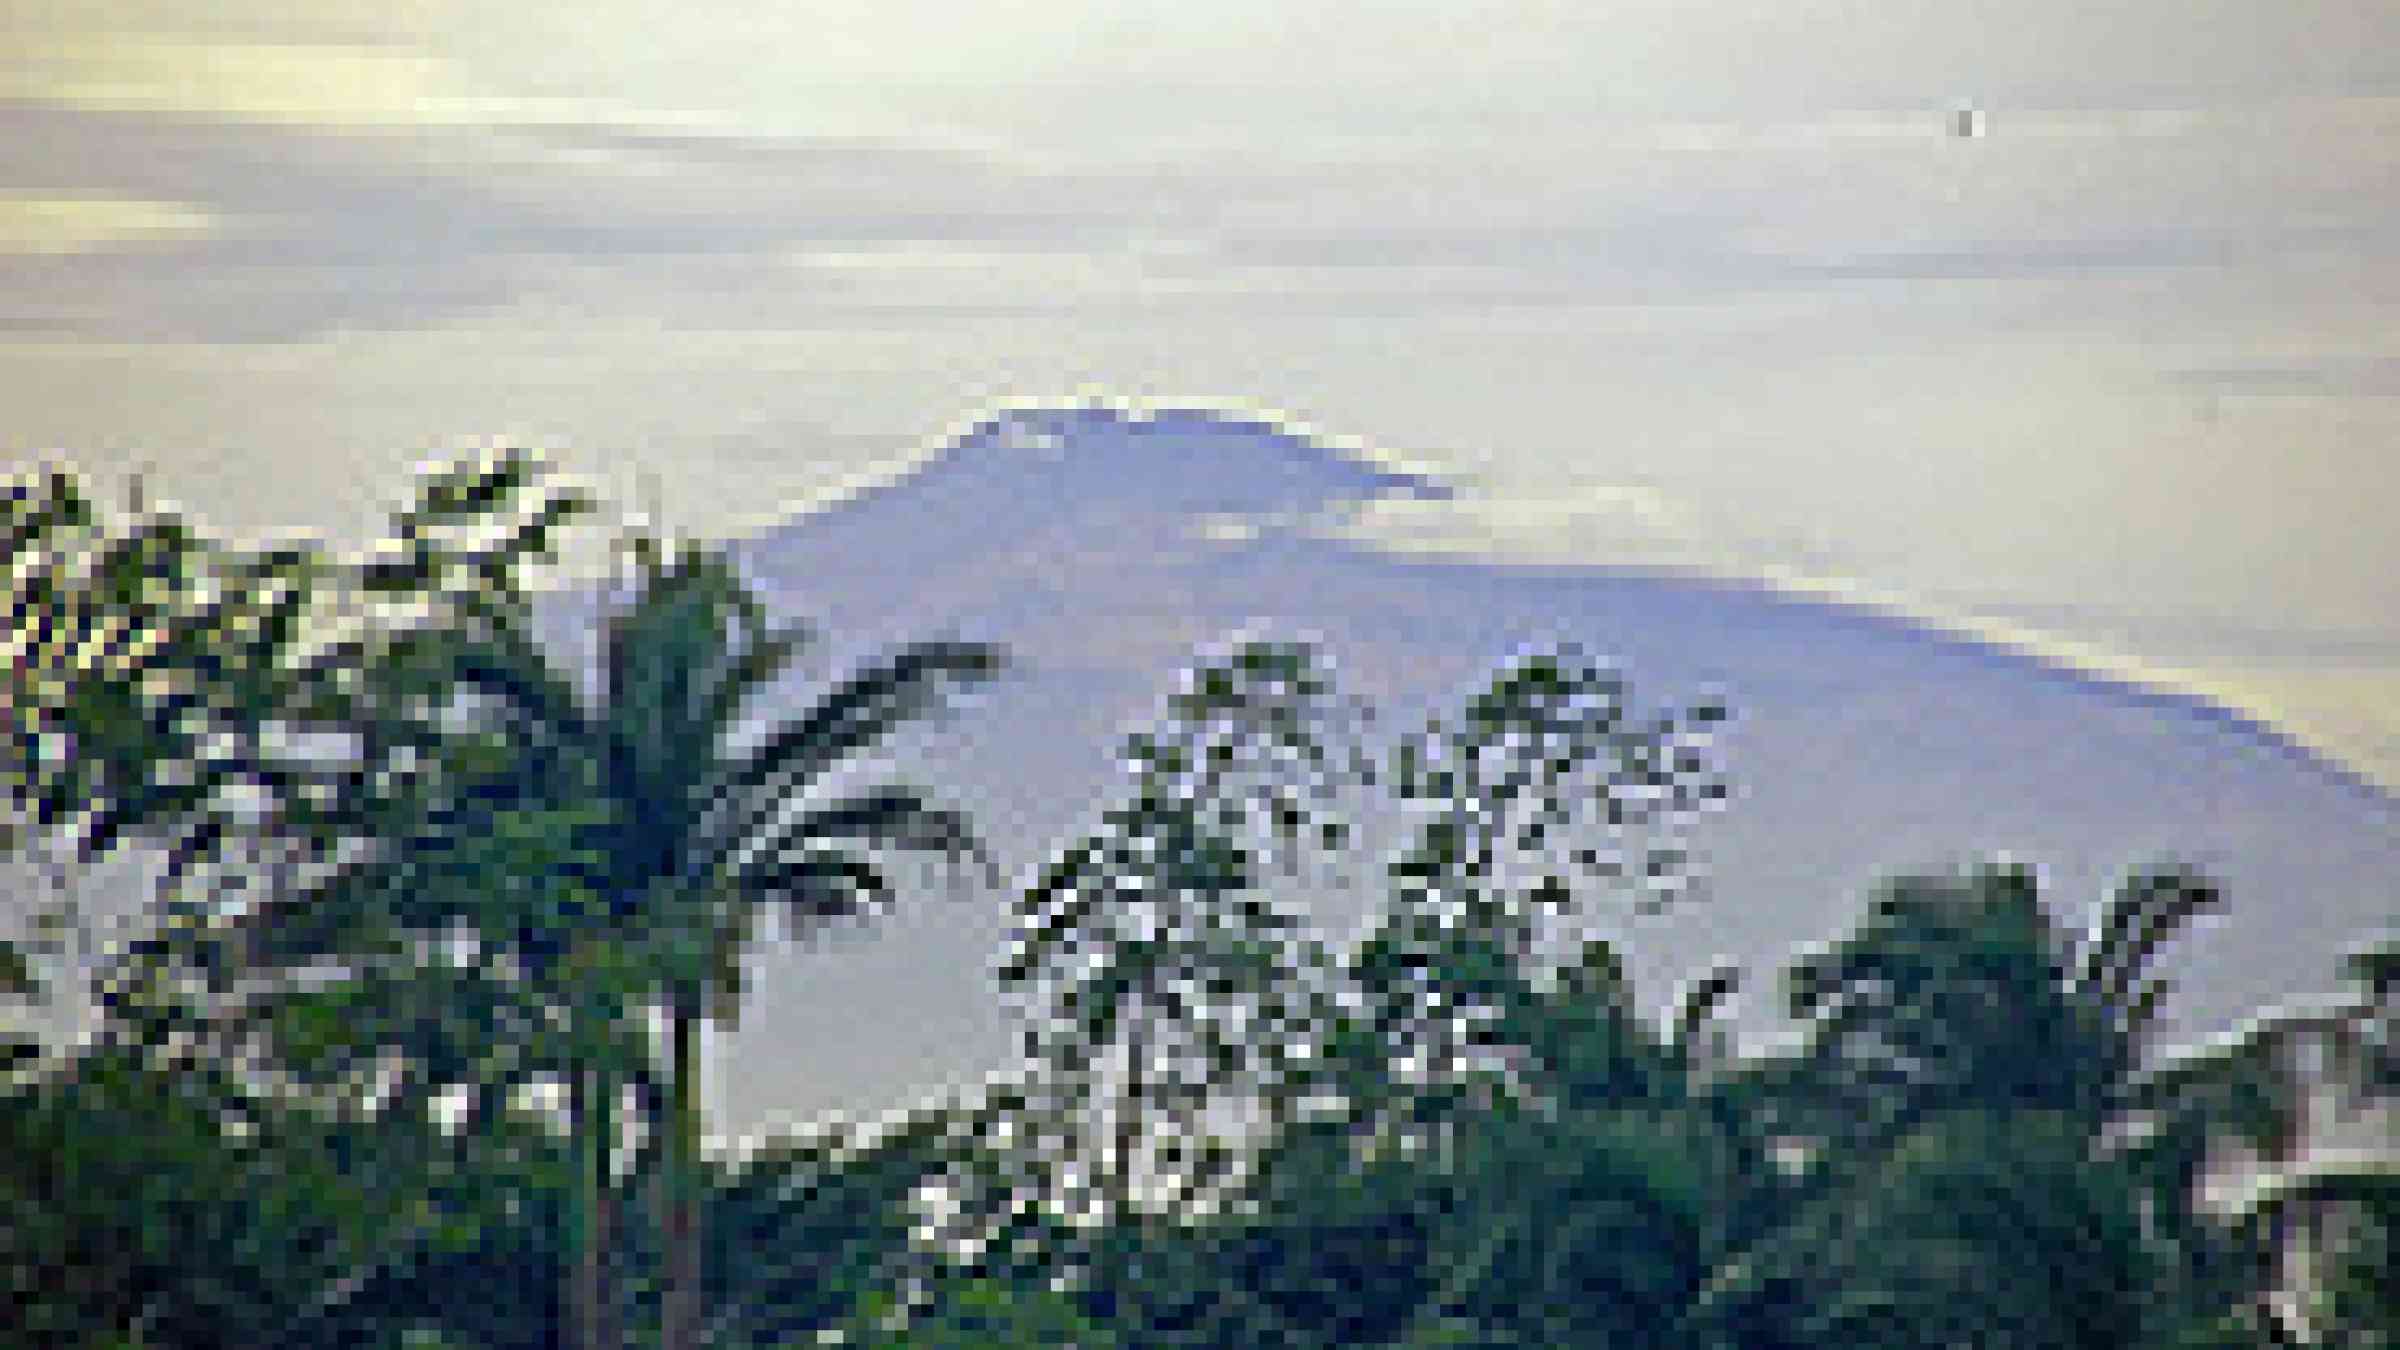 Photo of Mount Fako, Cameroon by John and Mel Kots, Creative Commons Attribution-NonCommercial-NoDerivs 2.0 Generic http://www.flickr.com/photos/melanieandjohn/2347261849/sizes/m/in/photostream/